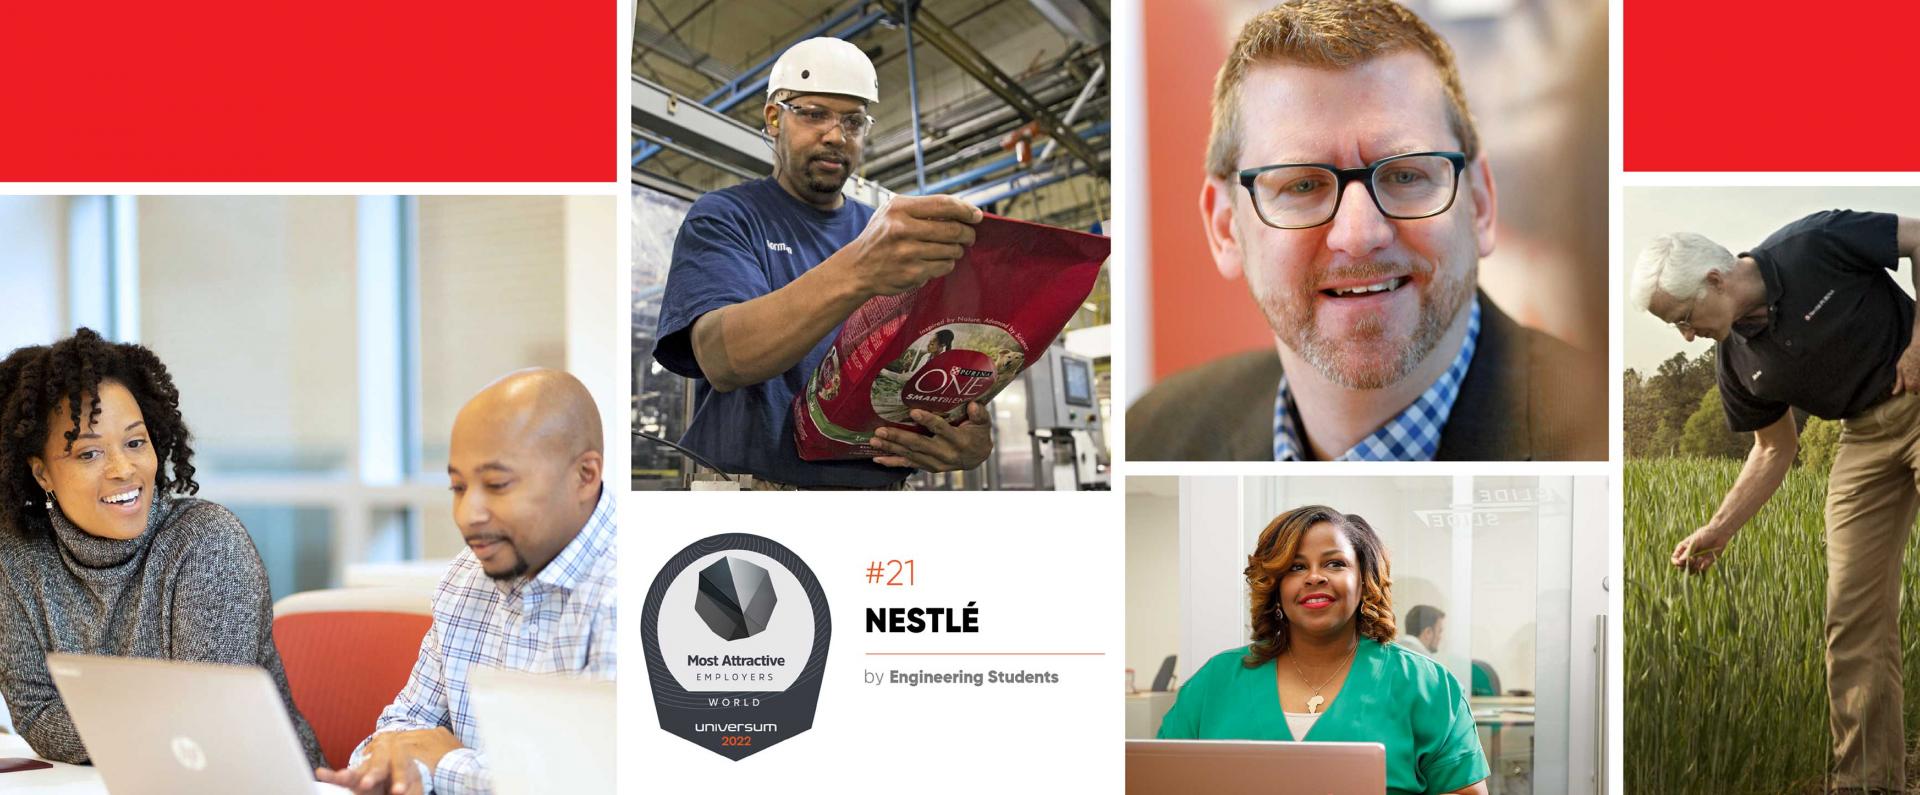 Purina Collage - Nestle 21st best company to work for